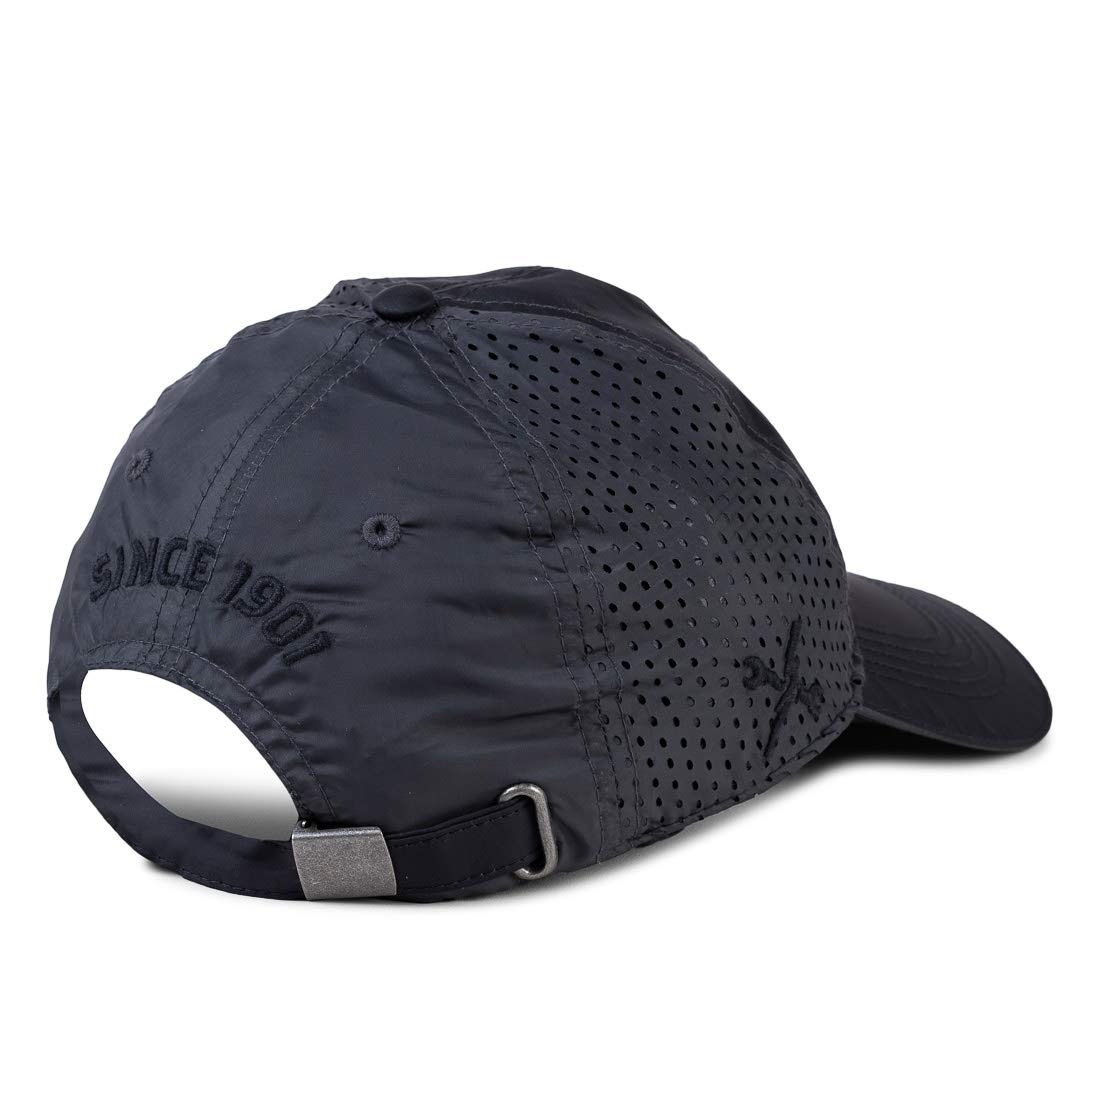 Royal Enfield Trucker Brand Cap Black - Scooter Style Noosa Motorcycles